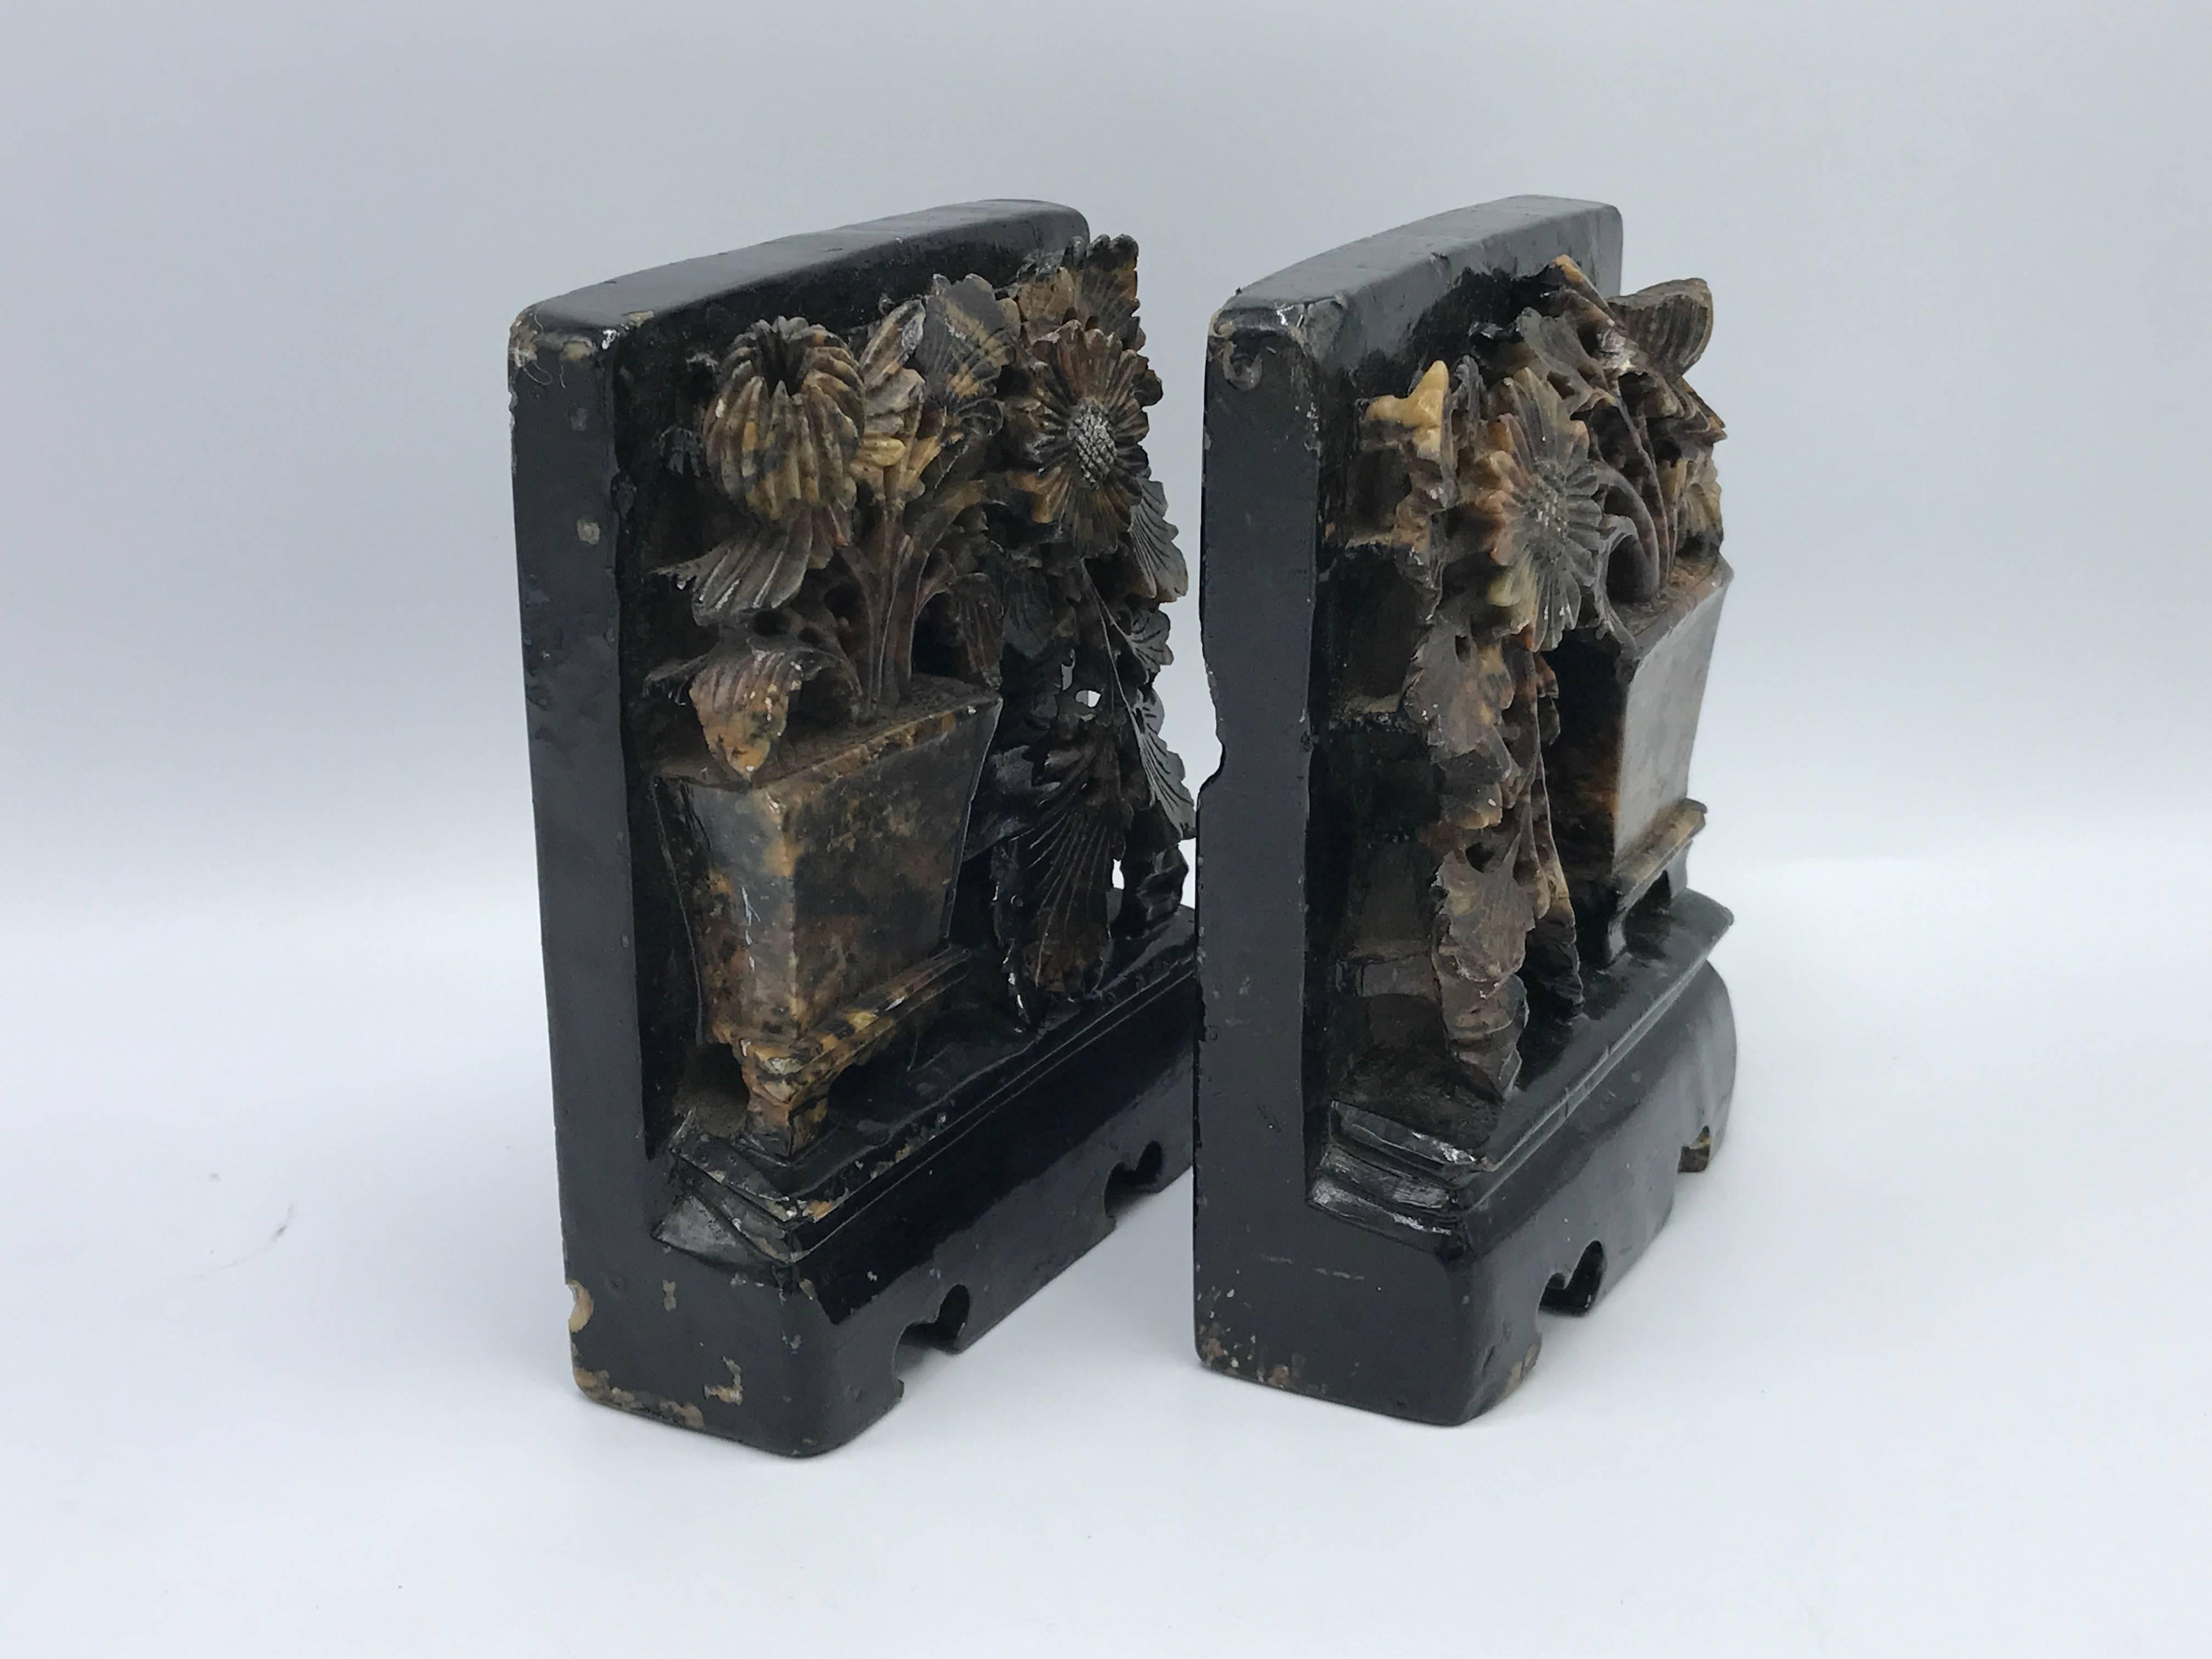 Offered is an absolutely stunning pair of 1920s, carved solid soapstone bookends with carved floral motif.